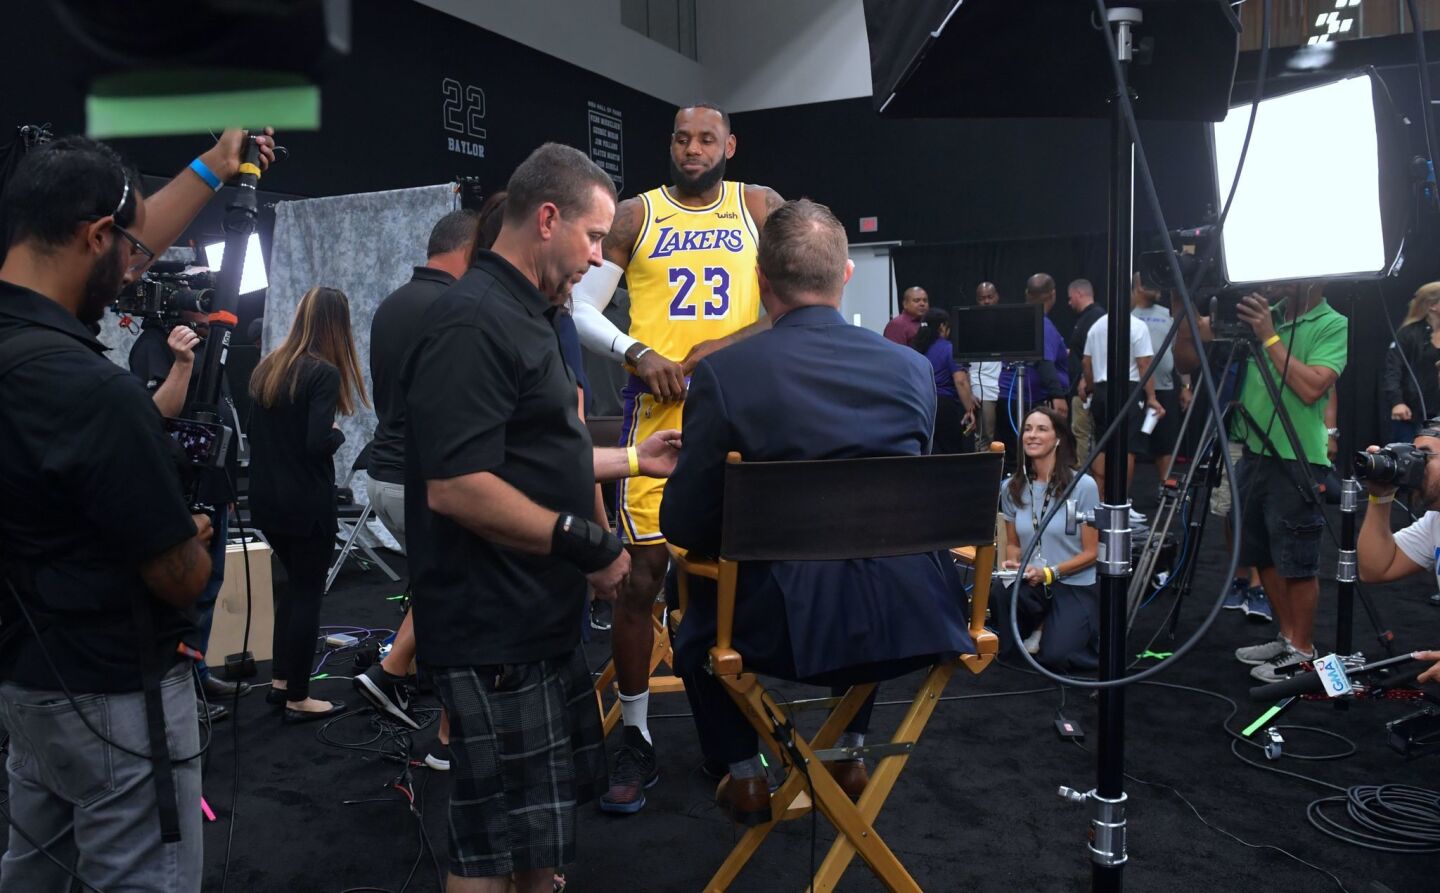 LeBron James looks on after an intervew during the Los Angeles Lakers Media Day event in Los Angeles, California, September 24, 2018. - The Lakers open their 2018 NBA season in Portland on October 18th. (Photo by Frederic J. BROWN / AFP)FREDERIC J. BROWN/AFP/Getty Images ** OUTS - ELSENT, FPG, CM - OUTS * NM, PH, VA if sourced by CT, LA or MoD **